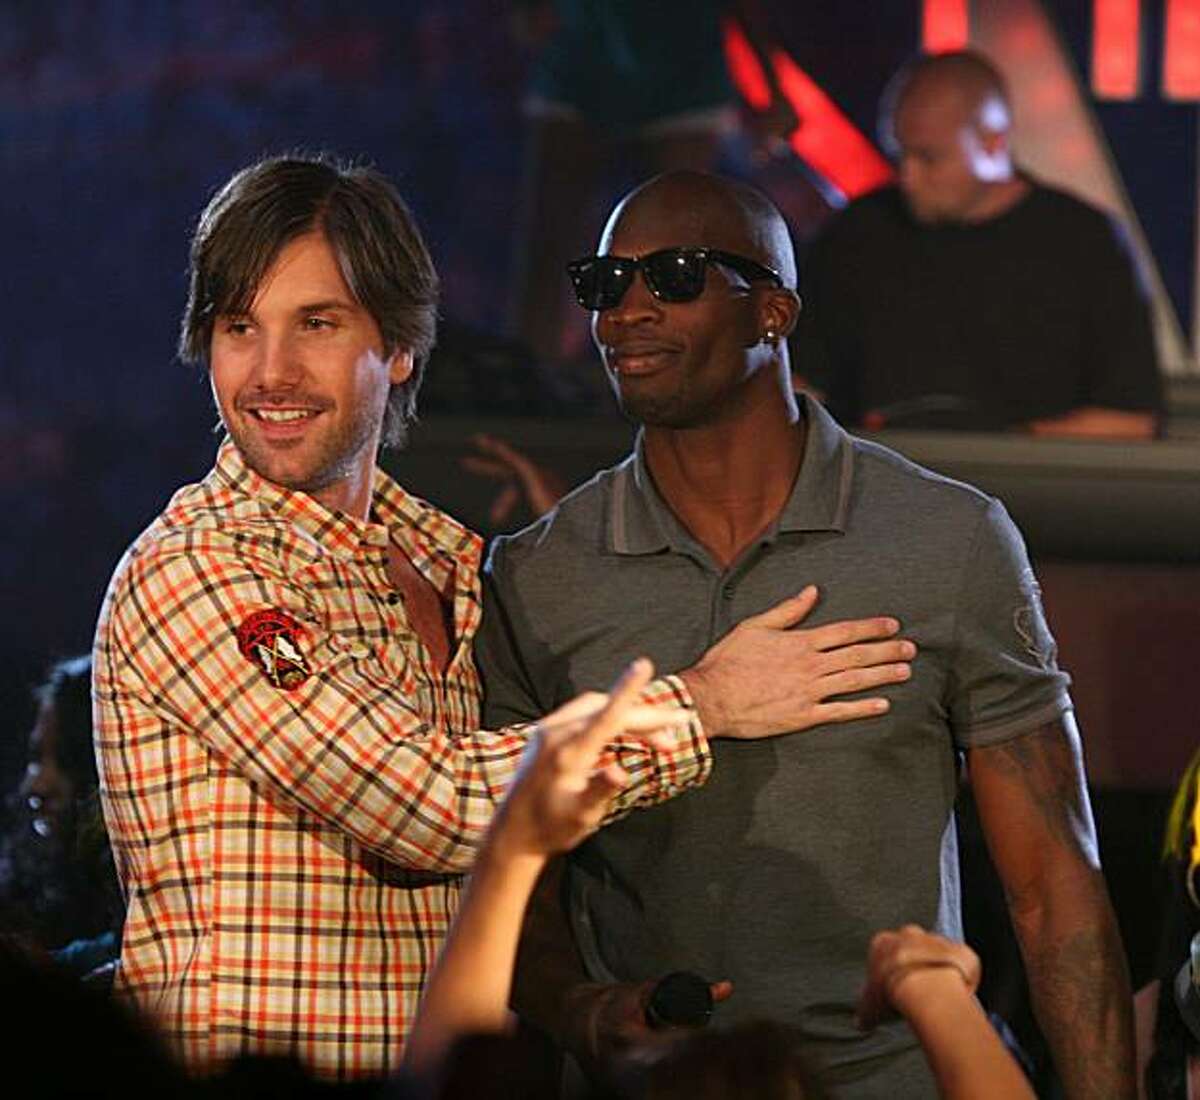 THE LEAGUE: L-R: Jon Lajoie and Chad Ochocinco on the season premiere of THE LEAGUE airing Thursday, September 16, 10:30 PM